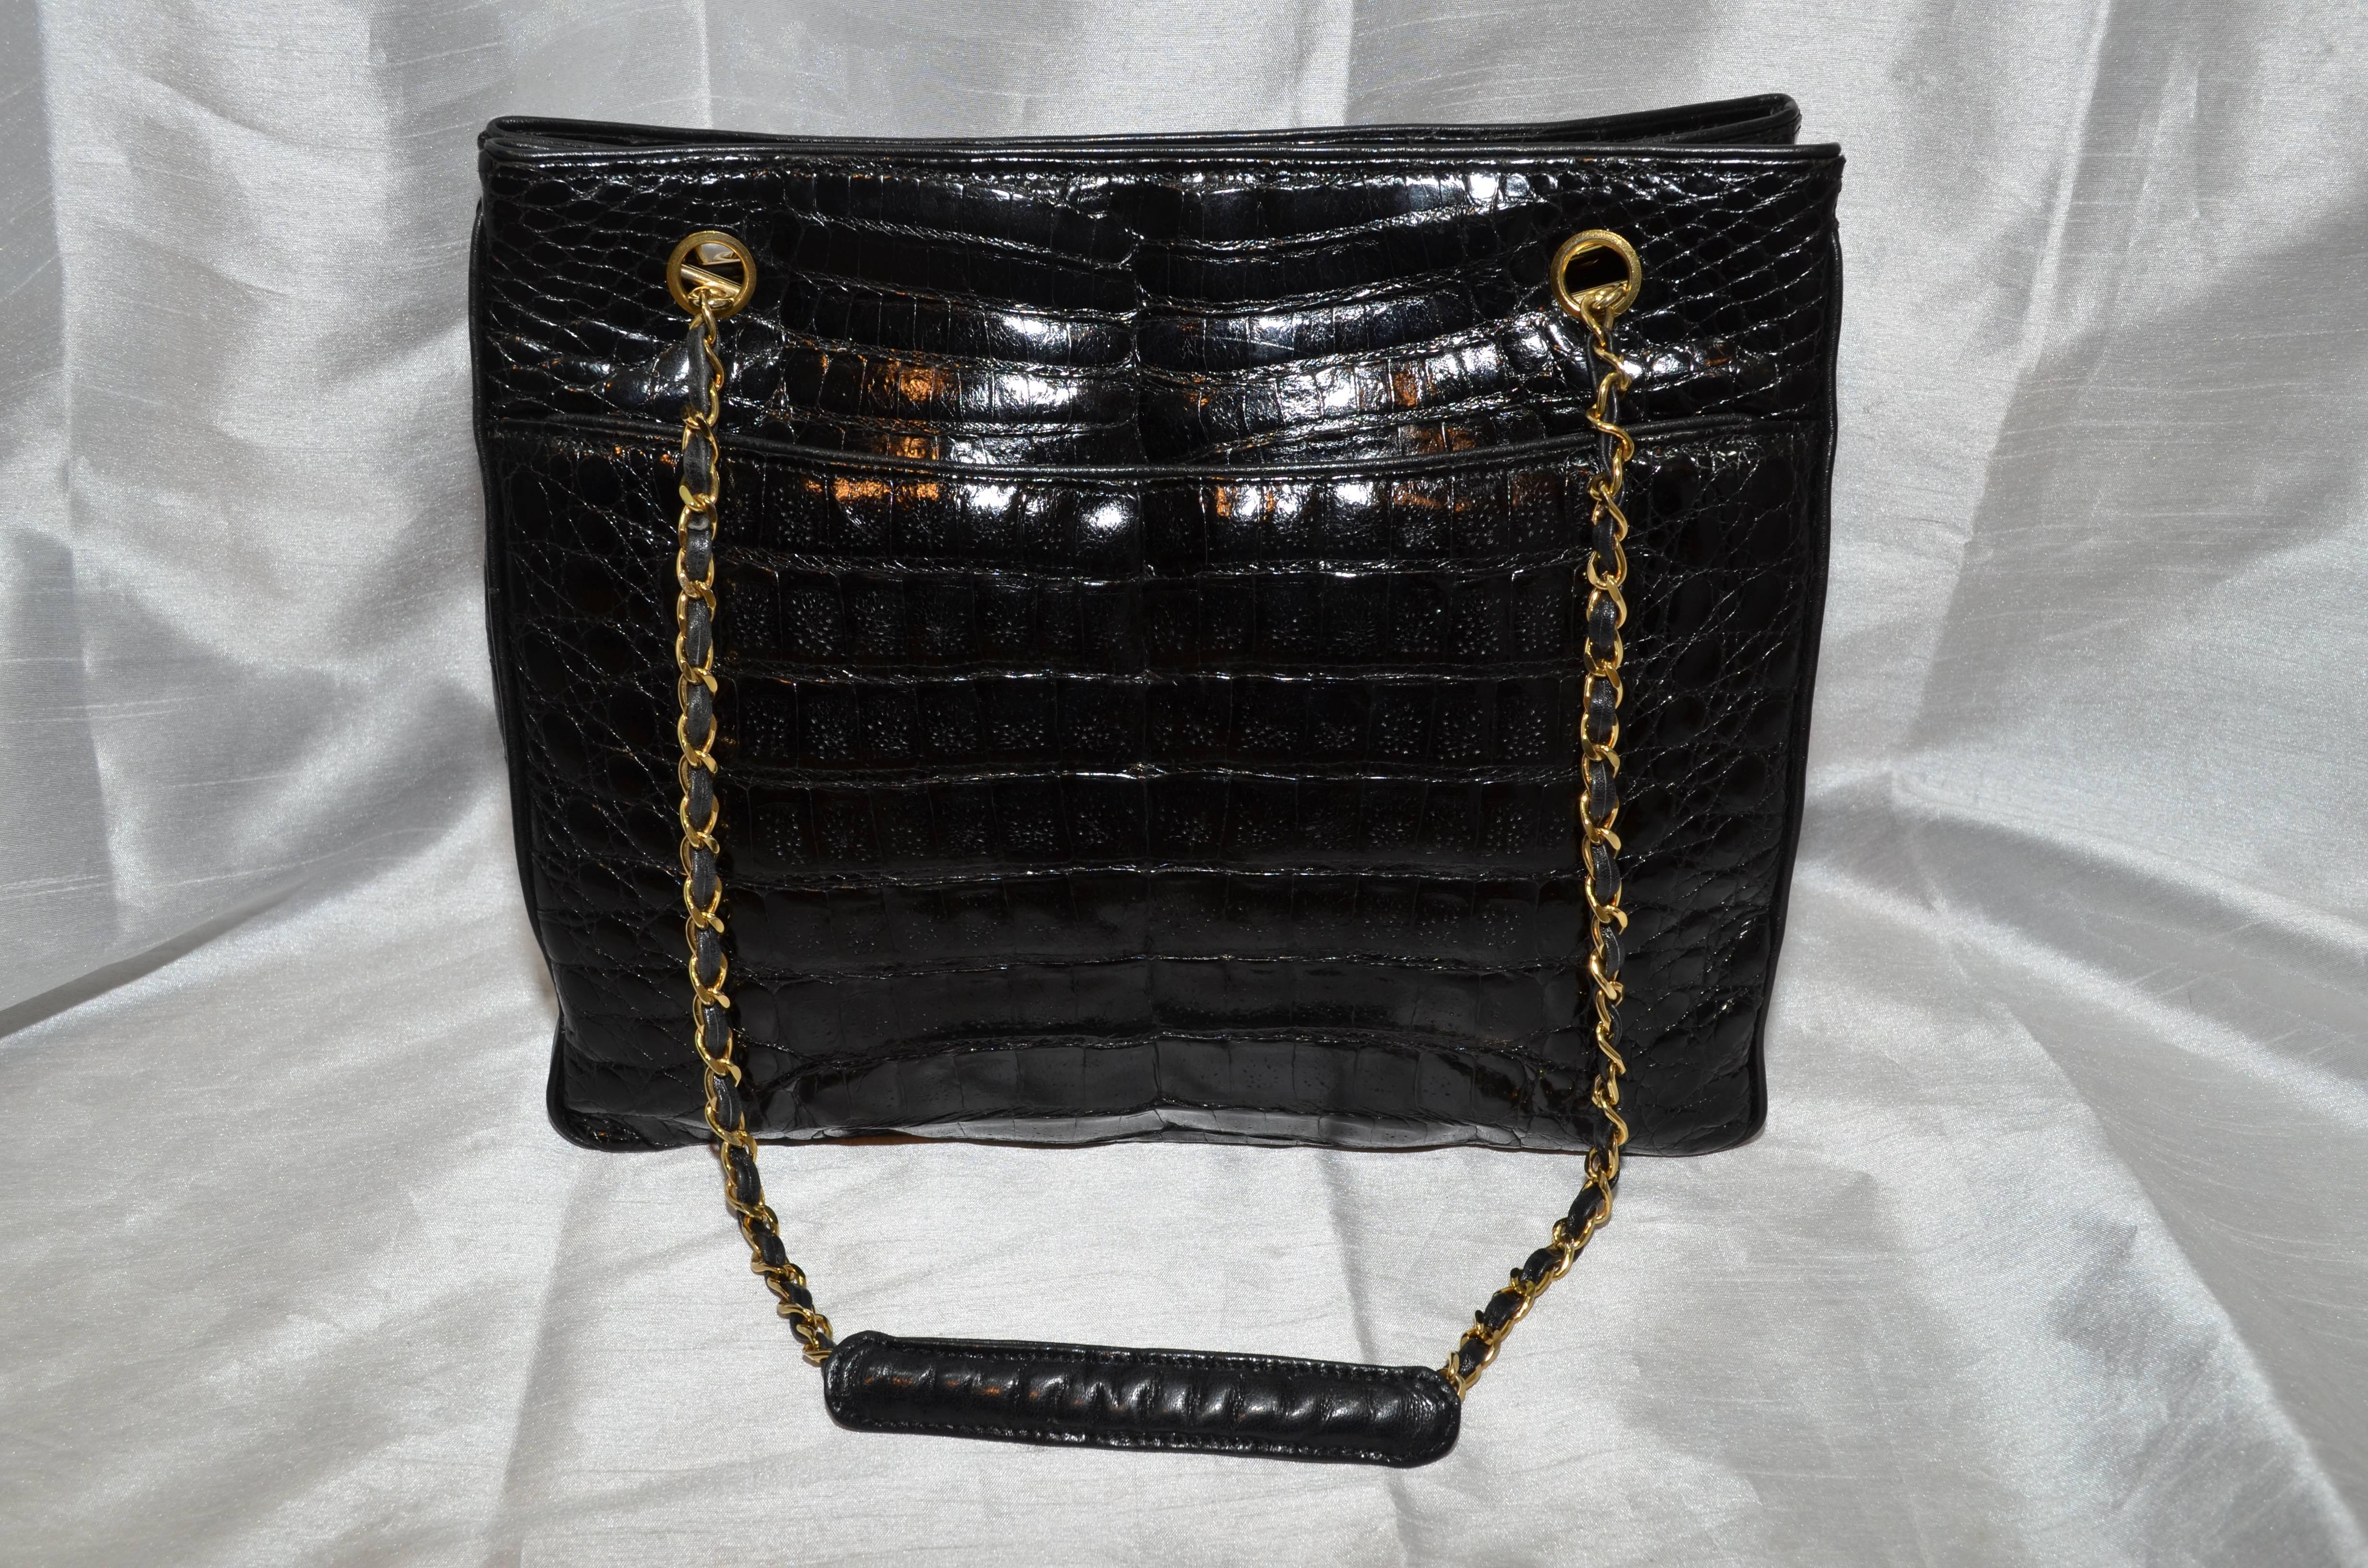 Gorgeous Chanel tote features 2 large outside compartments, 1 large inner compartment with 2 zip pockets, one on each side. Made in Italy. Excellent condition. Serial number dates the bag to 1986-1988. 

Measurements:
Height: 10